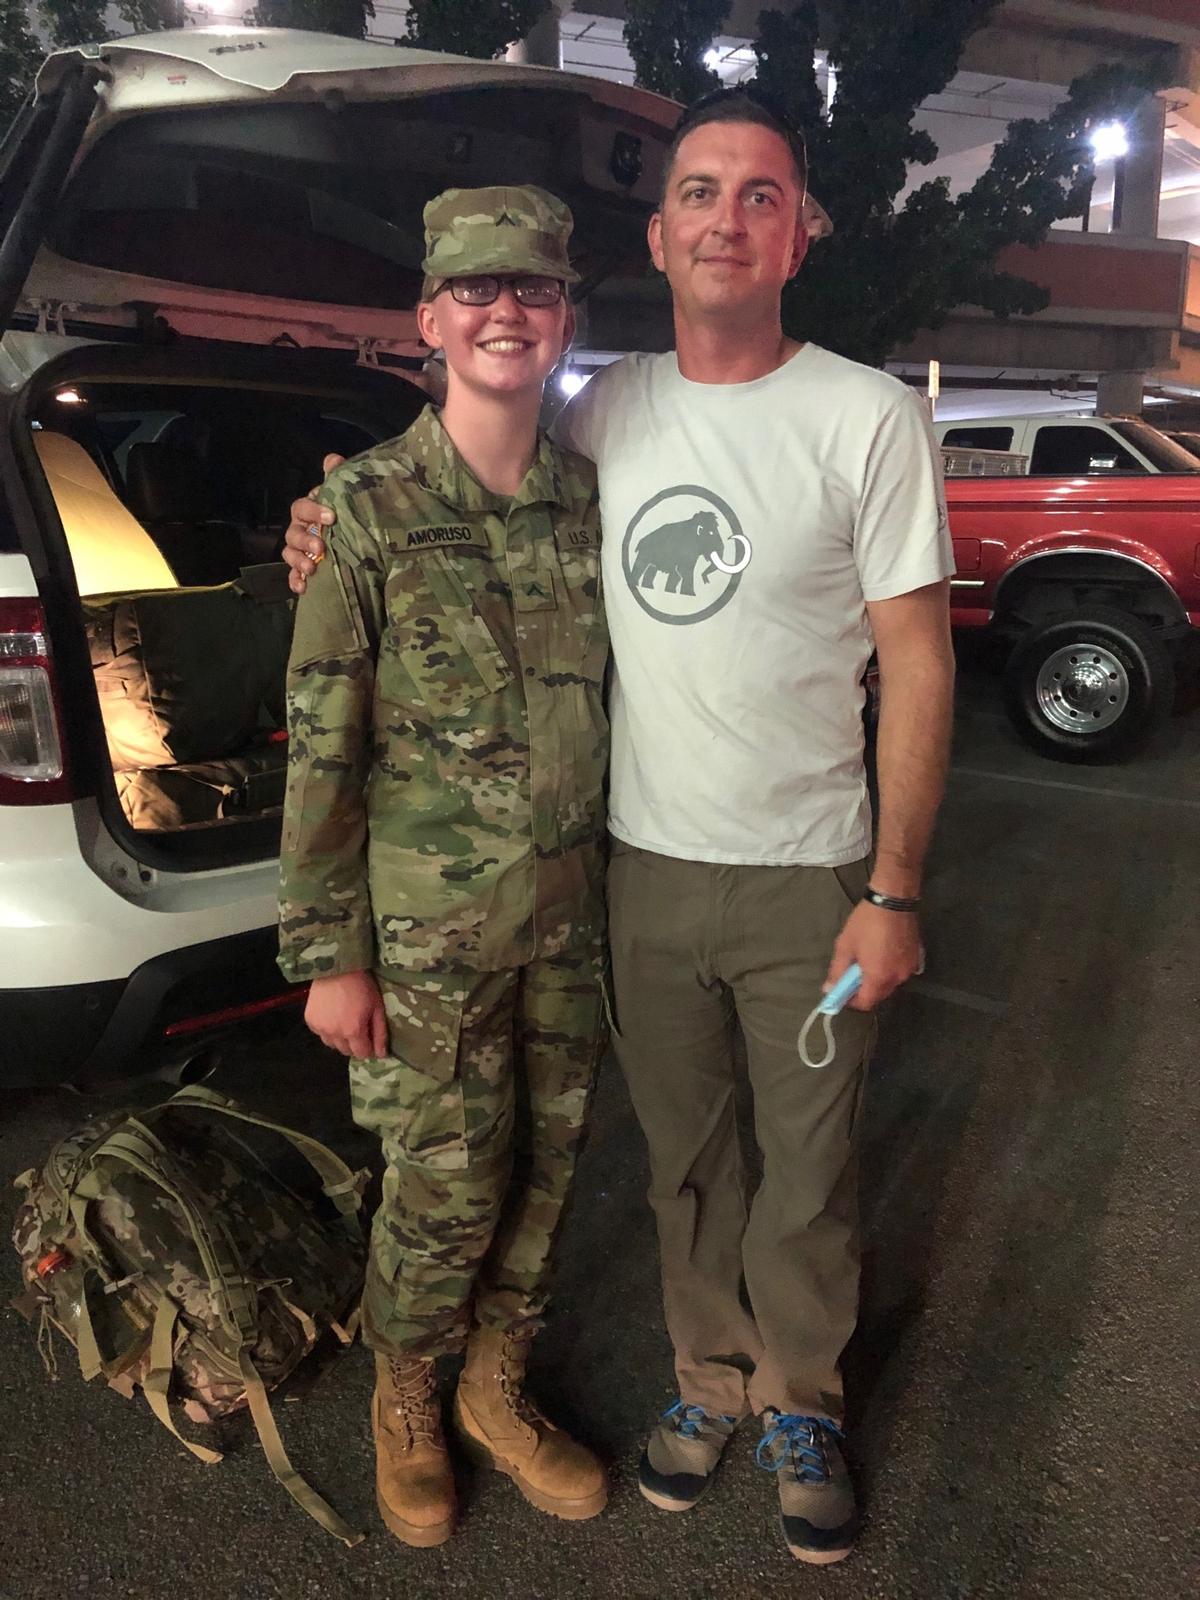 Idaho Army National Guard Pvt. Ashlynn Amoruso poses with her father, 1st Sgt. Dan Amoruso, at the Boise Airport upon returning from Basic Combat Training on Aug. 20, 2020 (Idaho Army National Guard/DVIDSHUB)